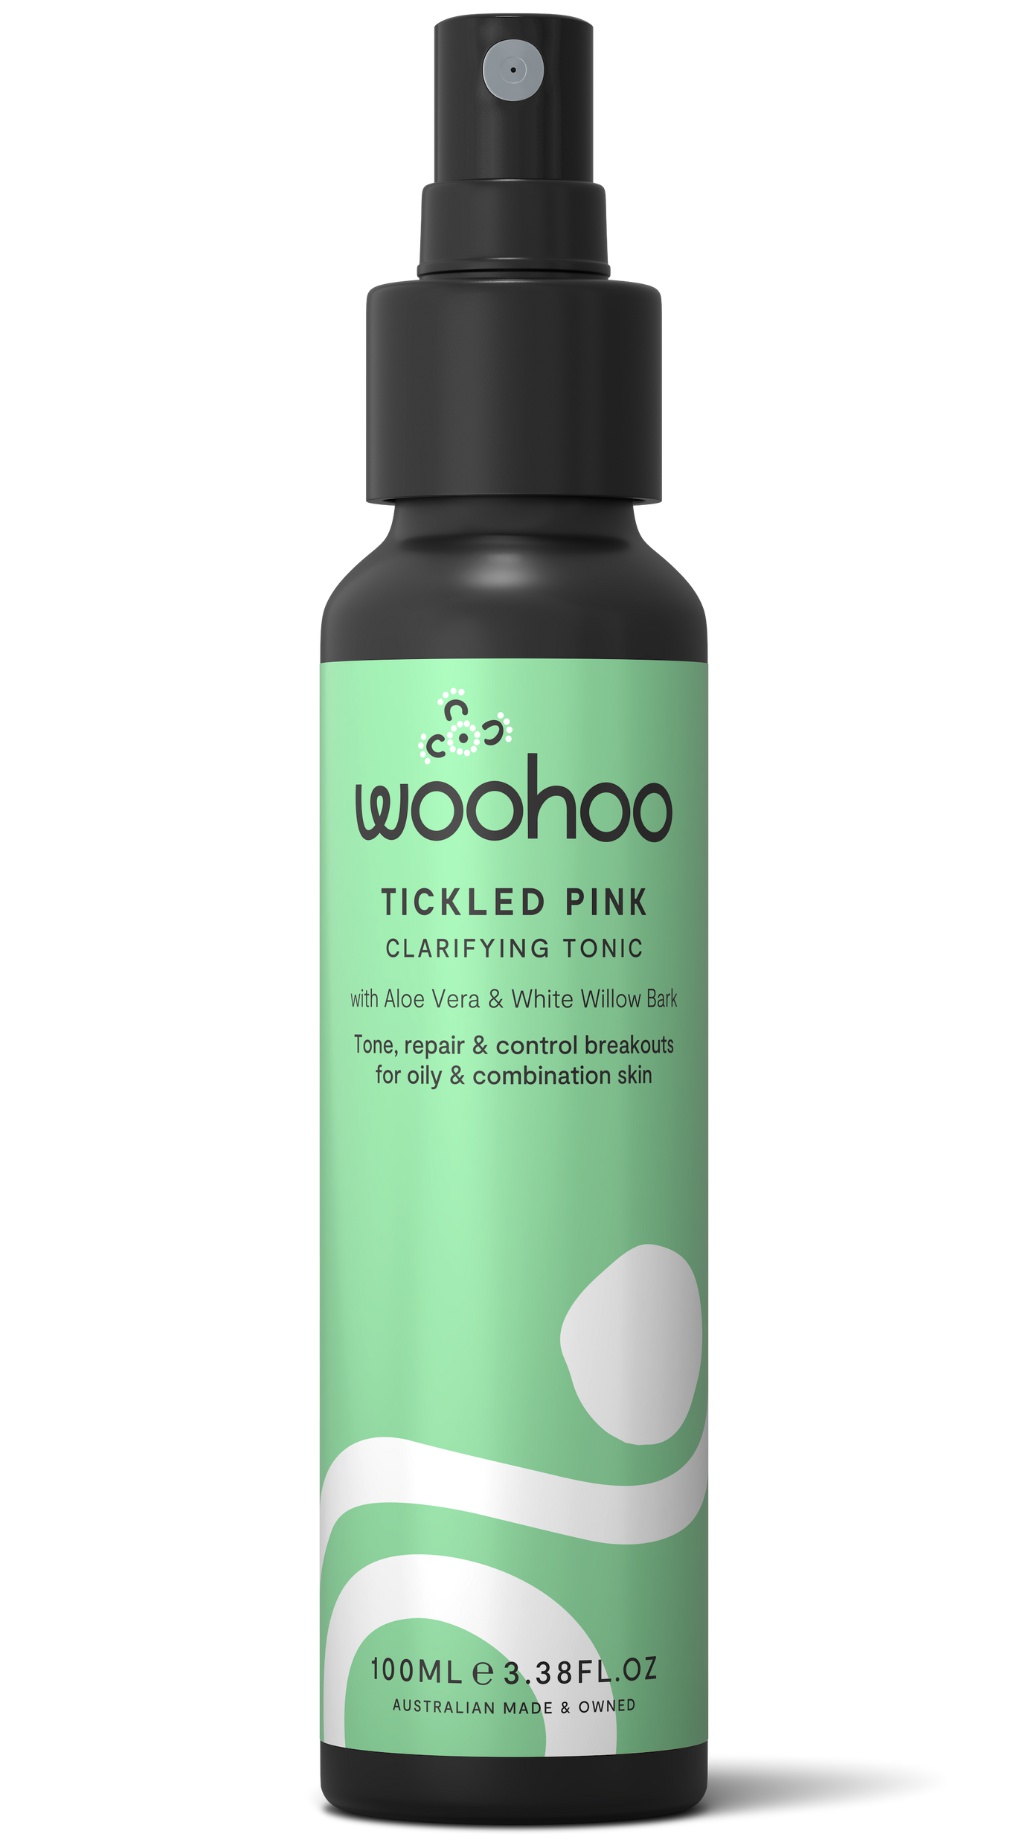 Woohoo Tickled Pink Clarifying Tonic